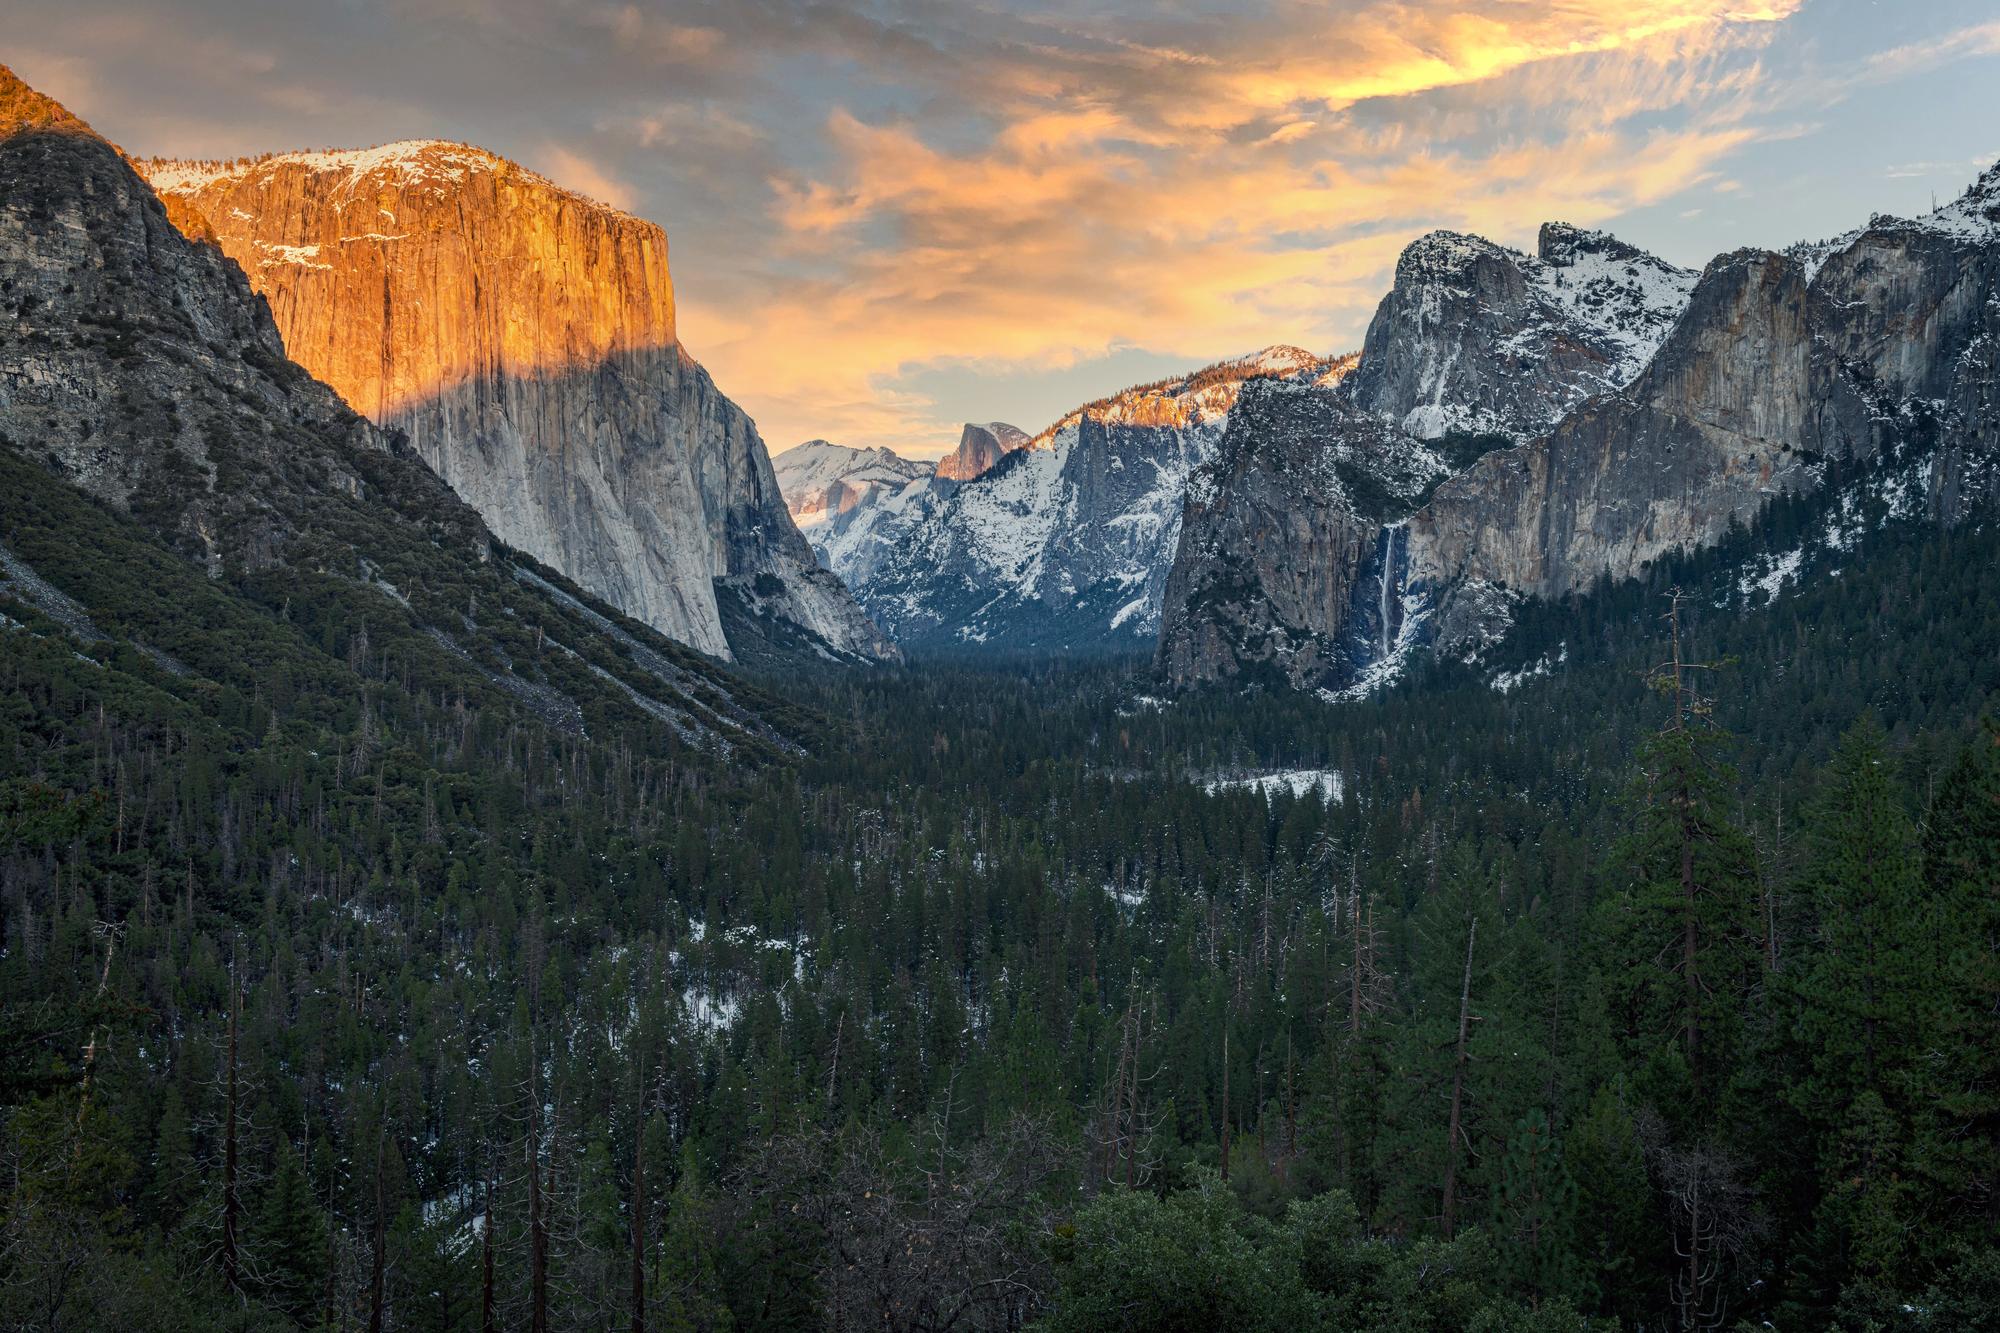 The last rays of sun on this iconic Yosemite vista at Tunnel View